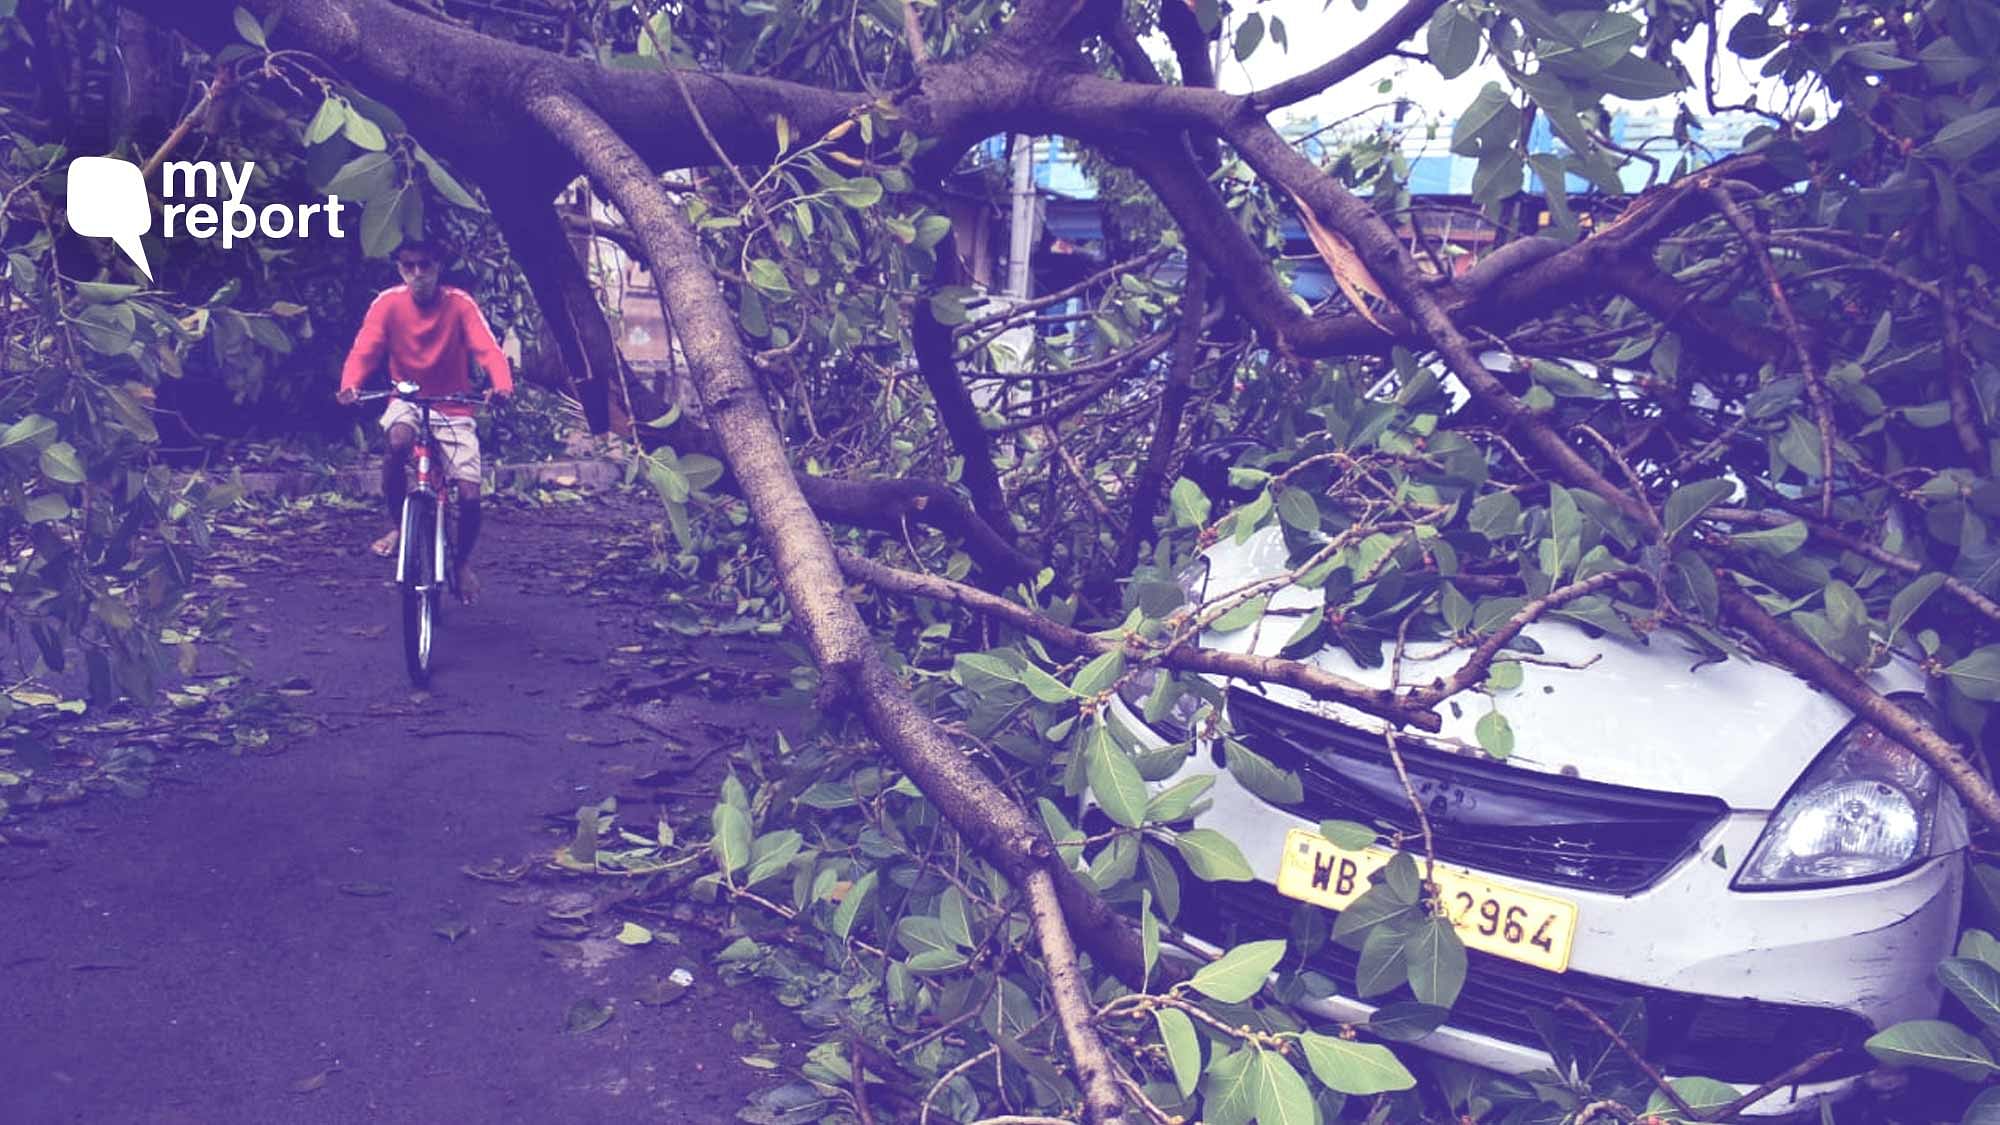 The whole night (20 May) we witnessed Cyclone Amphan hit, it was like a nightmare for my family and me.